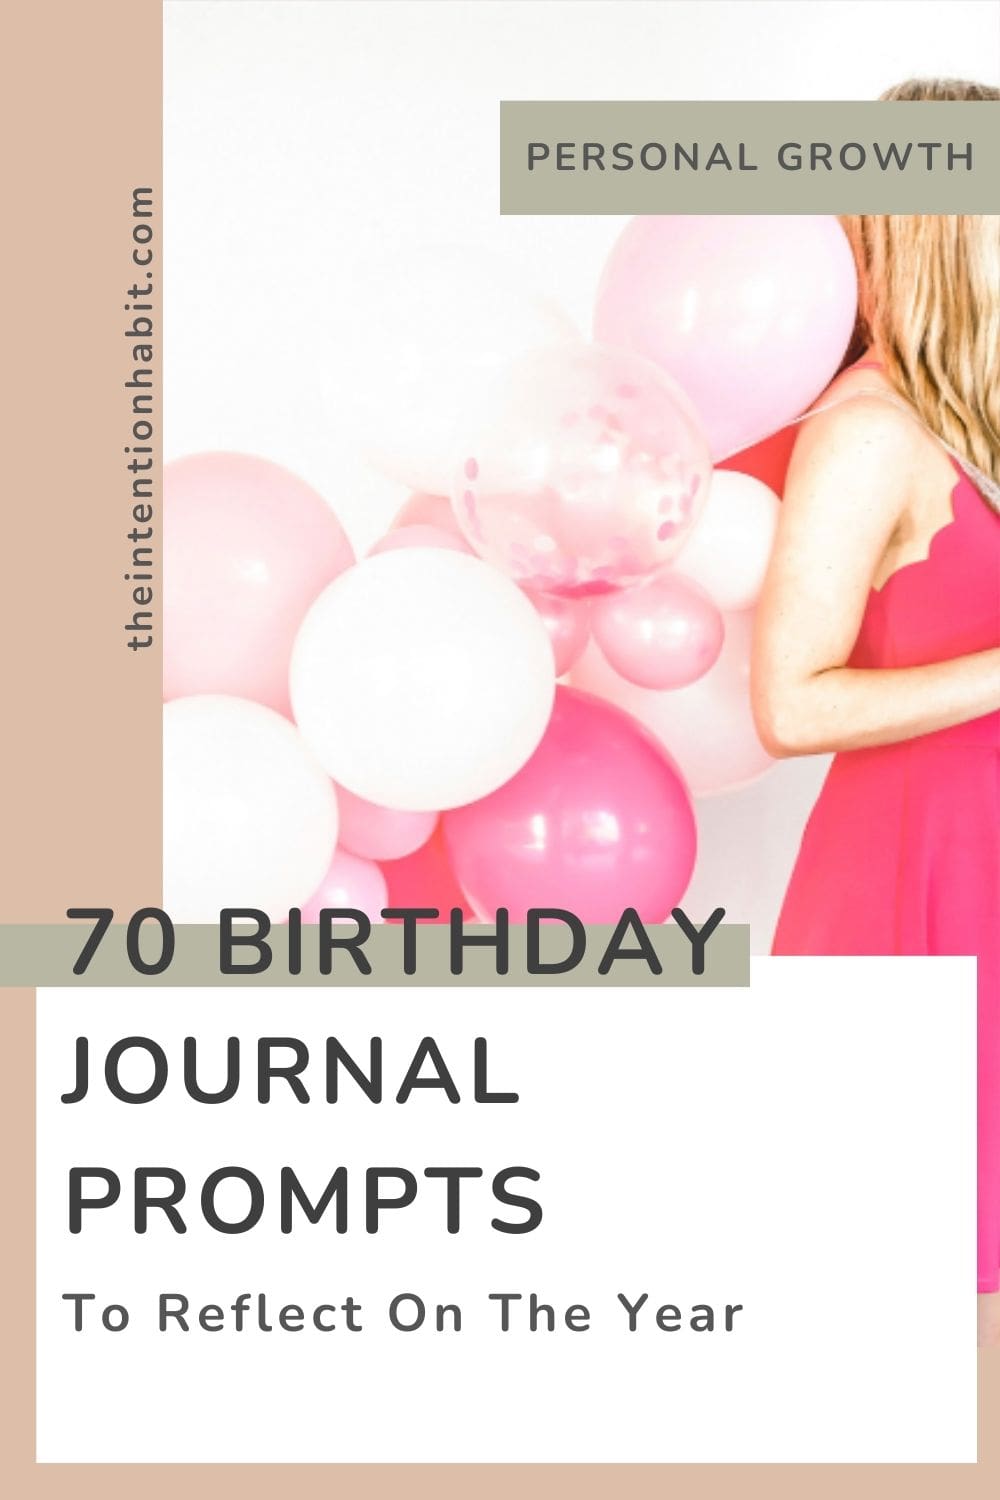 70 birthday journal prompts to reflect on the past year.